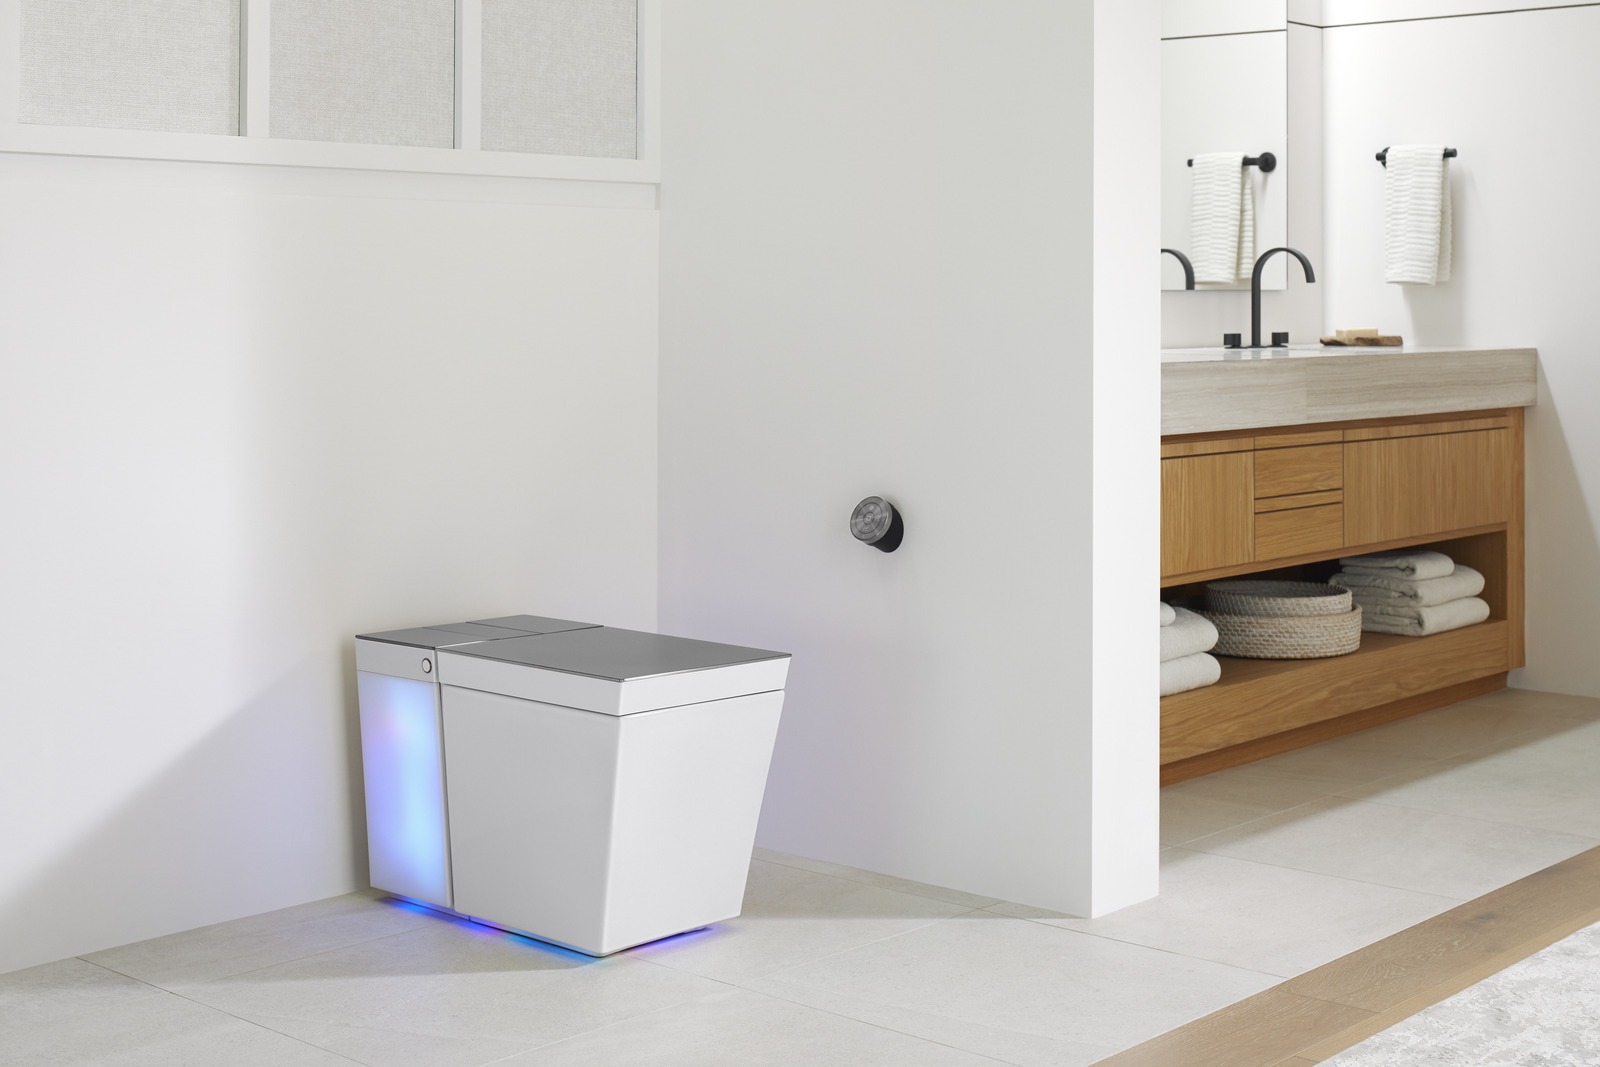 Cool, but unnecessary smart home gadgets